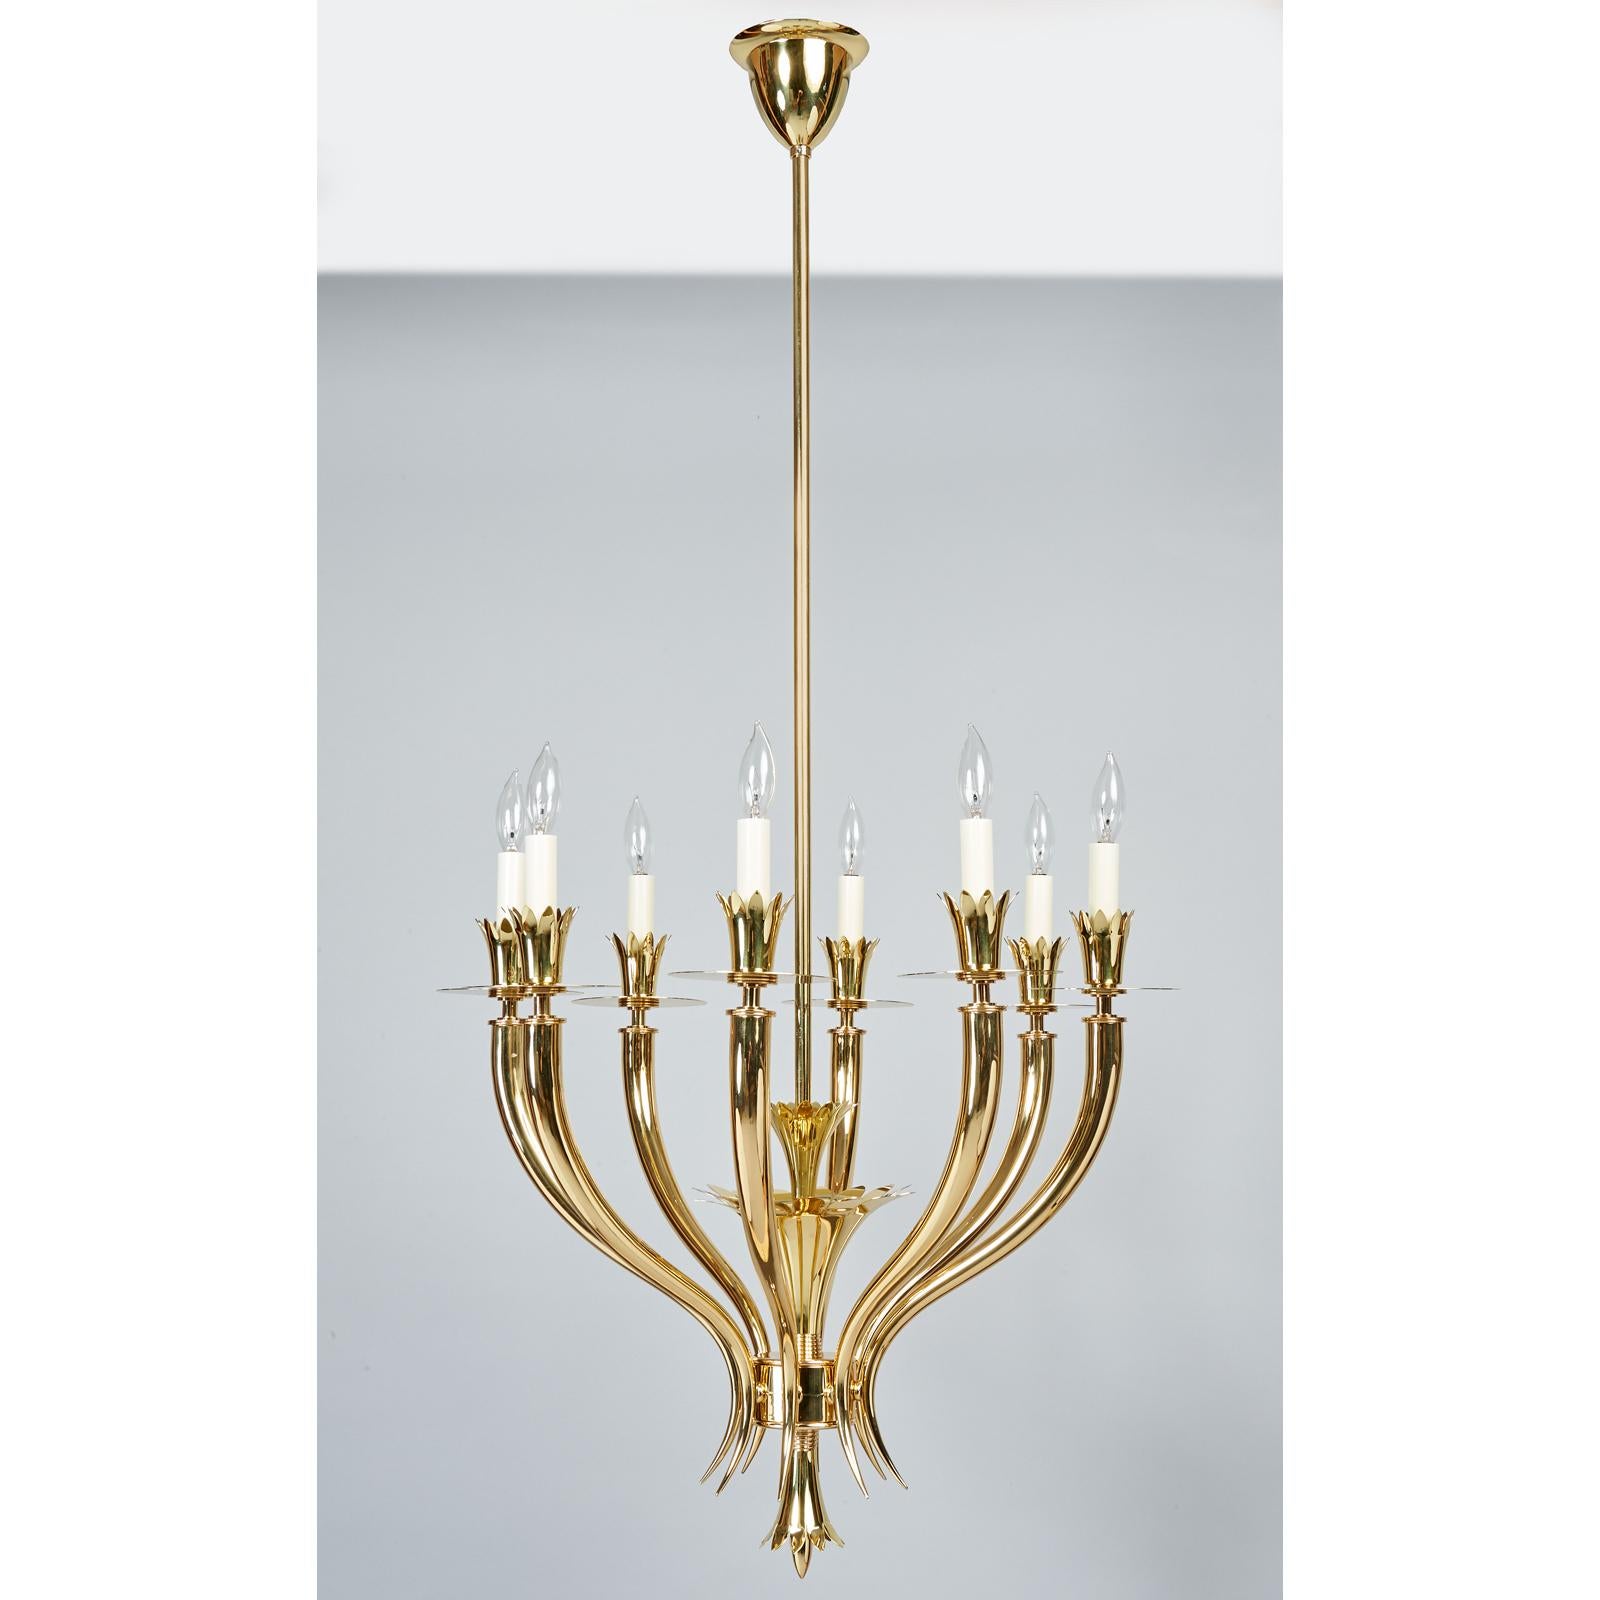 Mid-Century Modern Gio Ponti: Important Geometric 8-Arm Chandelier in Polished Brass, Italy 1930s For Sale